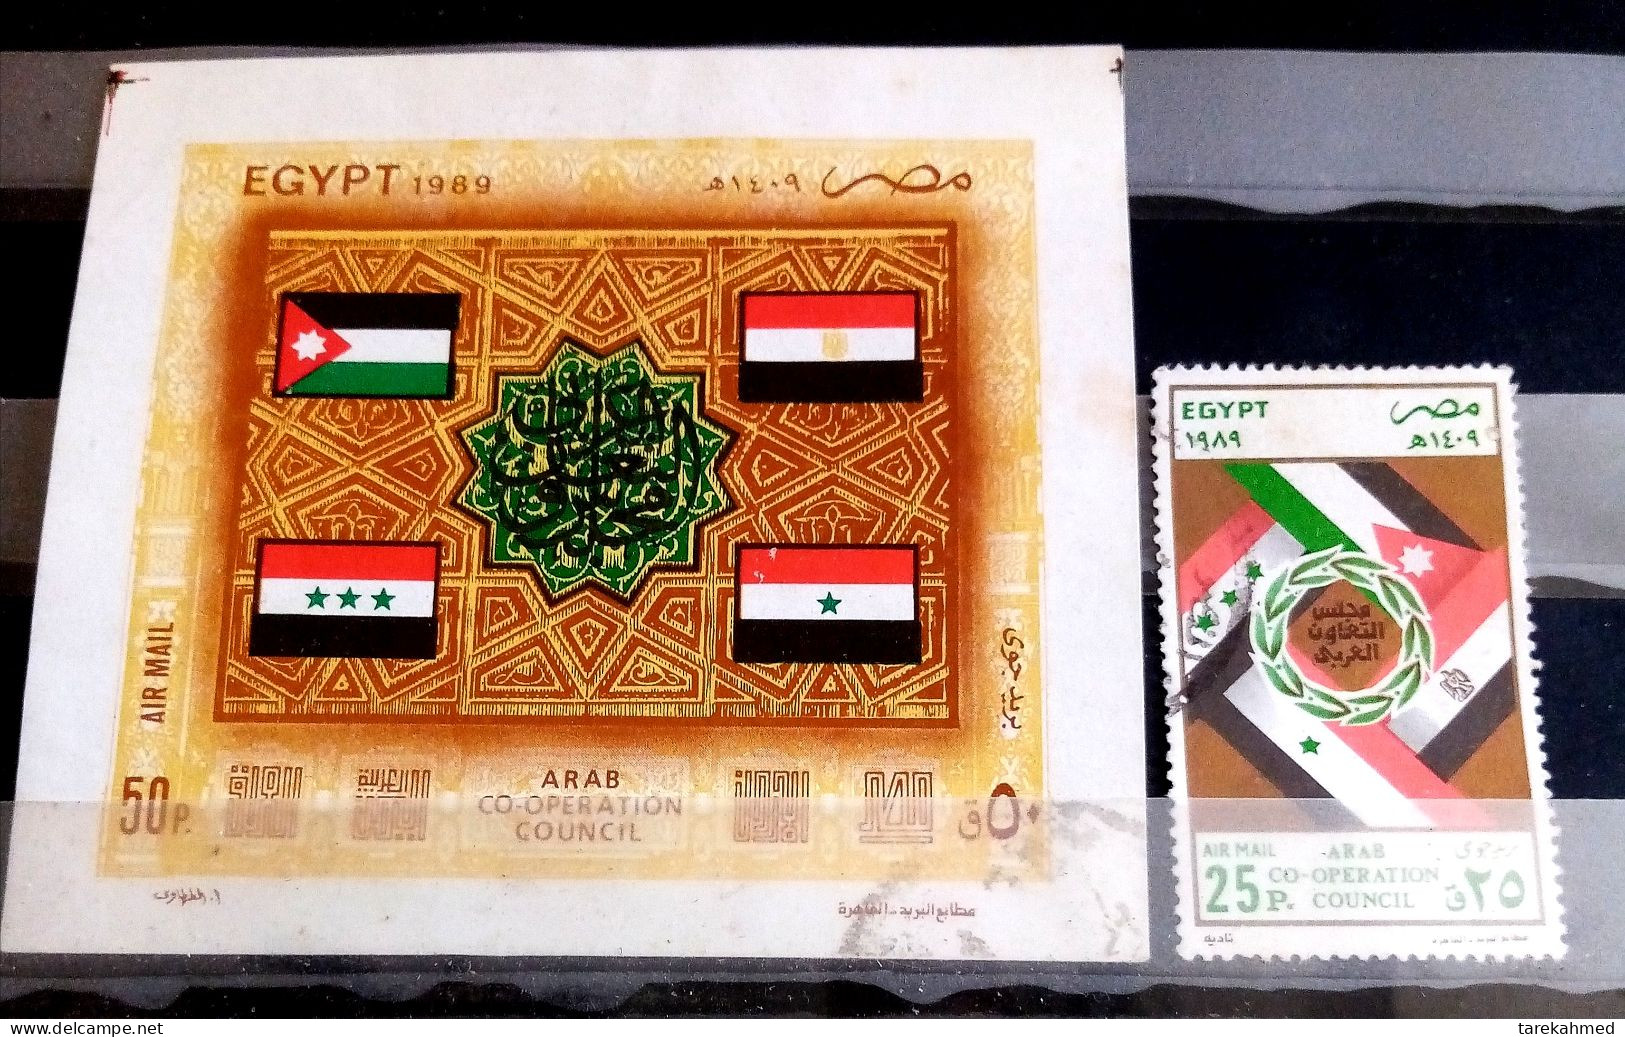 EGYPT 1989 , Complete SET, Stamp And S/S Of The ARAB CO-OPERATION COUNCIL, Flags, Airmail, MNH. - Ongebruikt